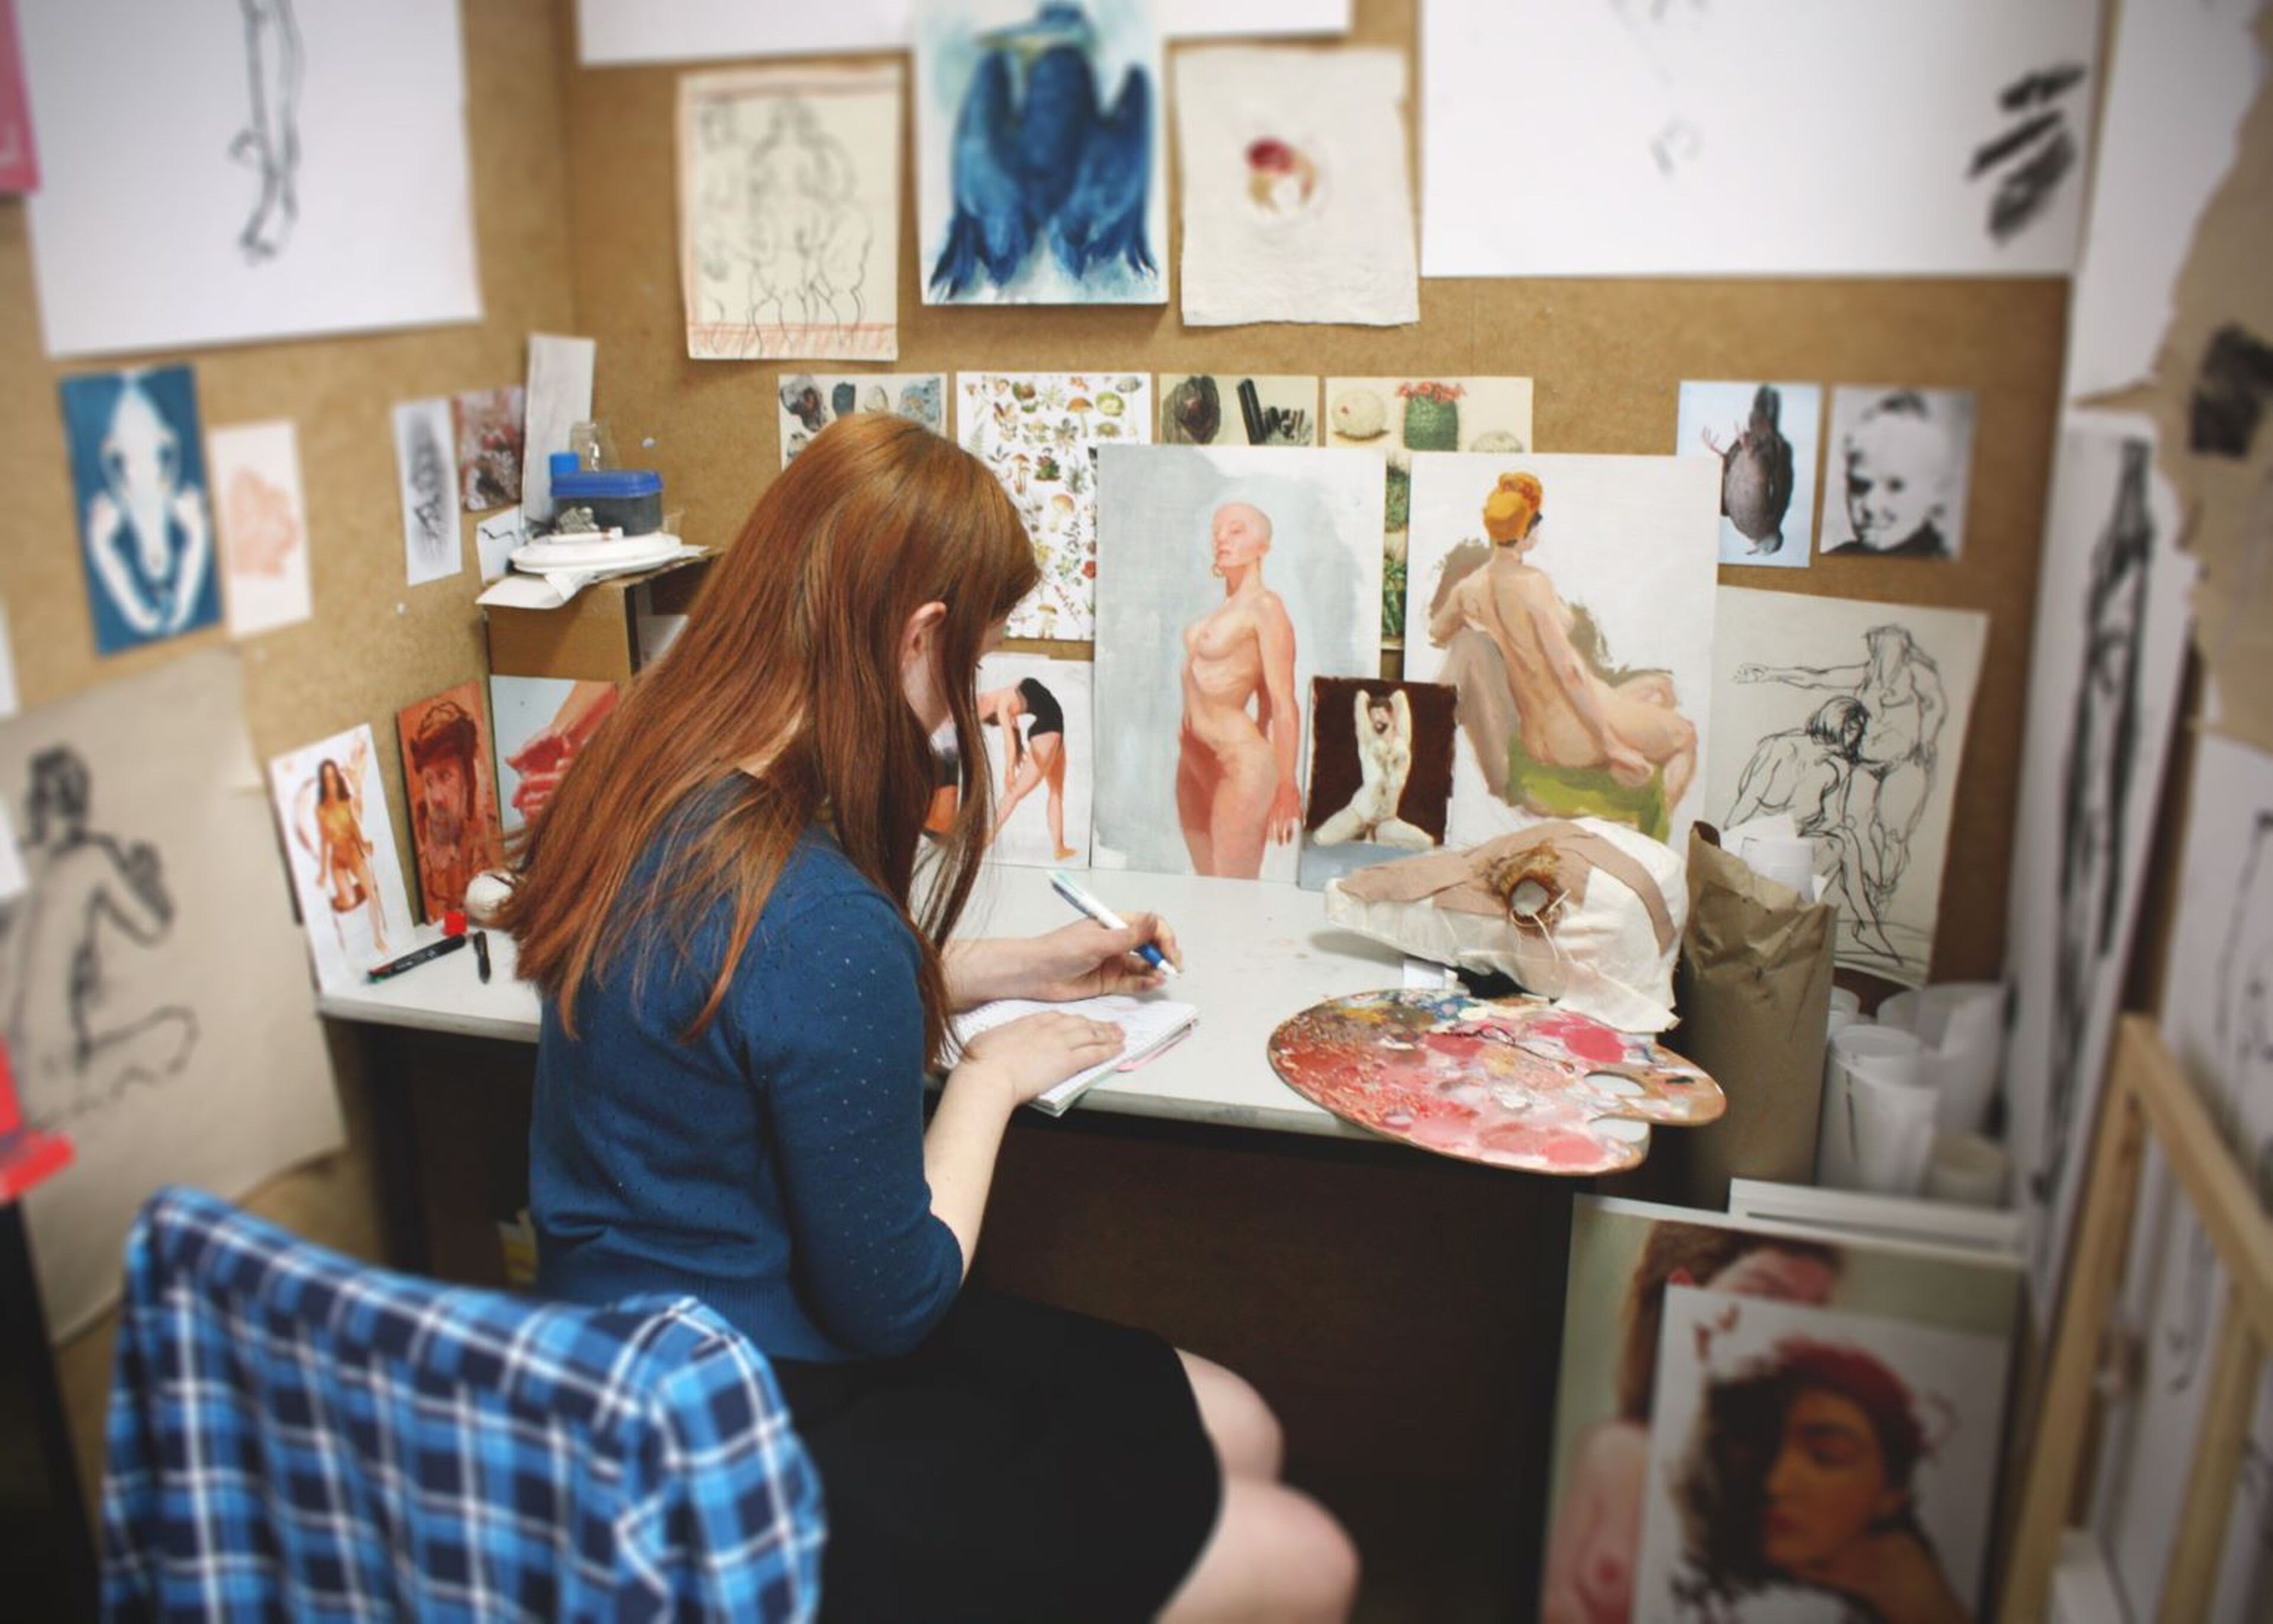 An artist lost in concentration sketches in her studio, her fiery hair mirroring the passion of her work.